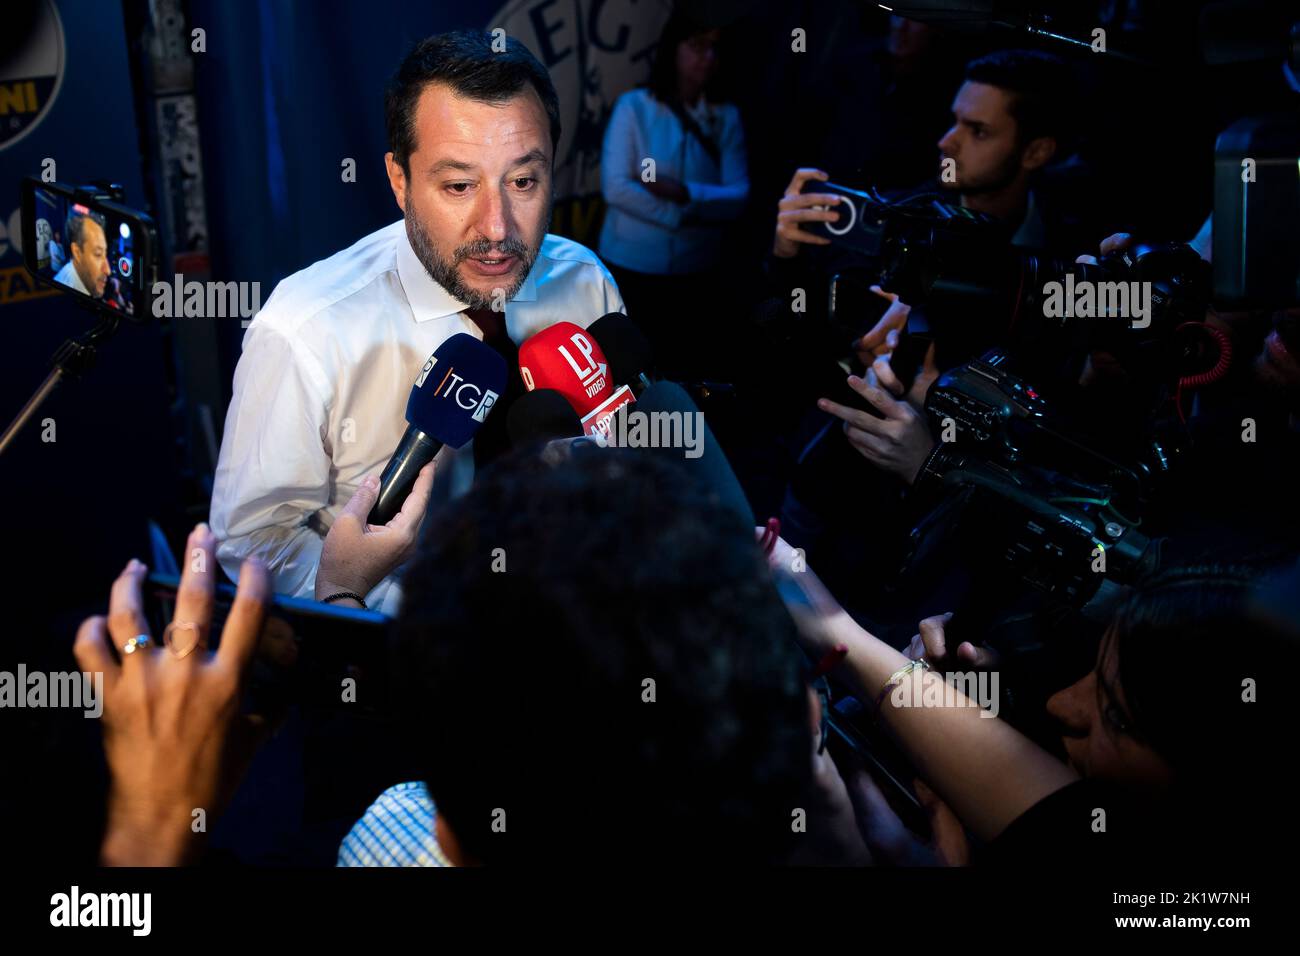 Turin, Italy. 20 September 2022. Matteo Salvini, leader of Italian right party Lega (League), speaks with journalists at the end of a rally as part of the campaign for general elections. Italians head to the polls for general elections on September 25. Credit: Nicolò Campo/Alamy Live News Stock Photo